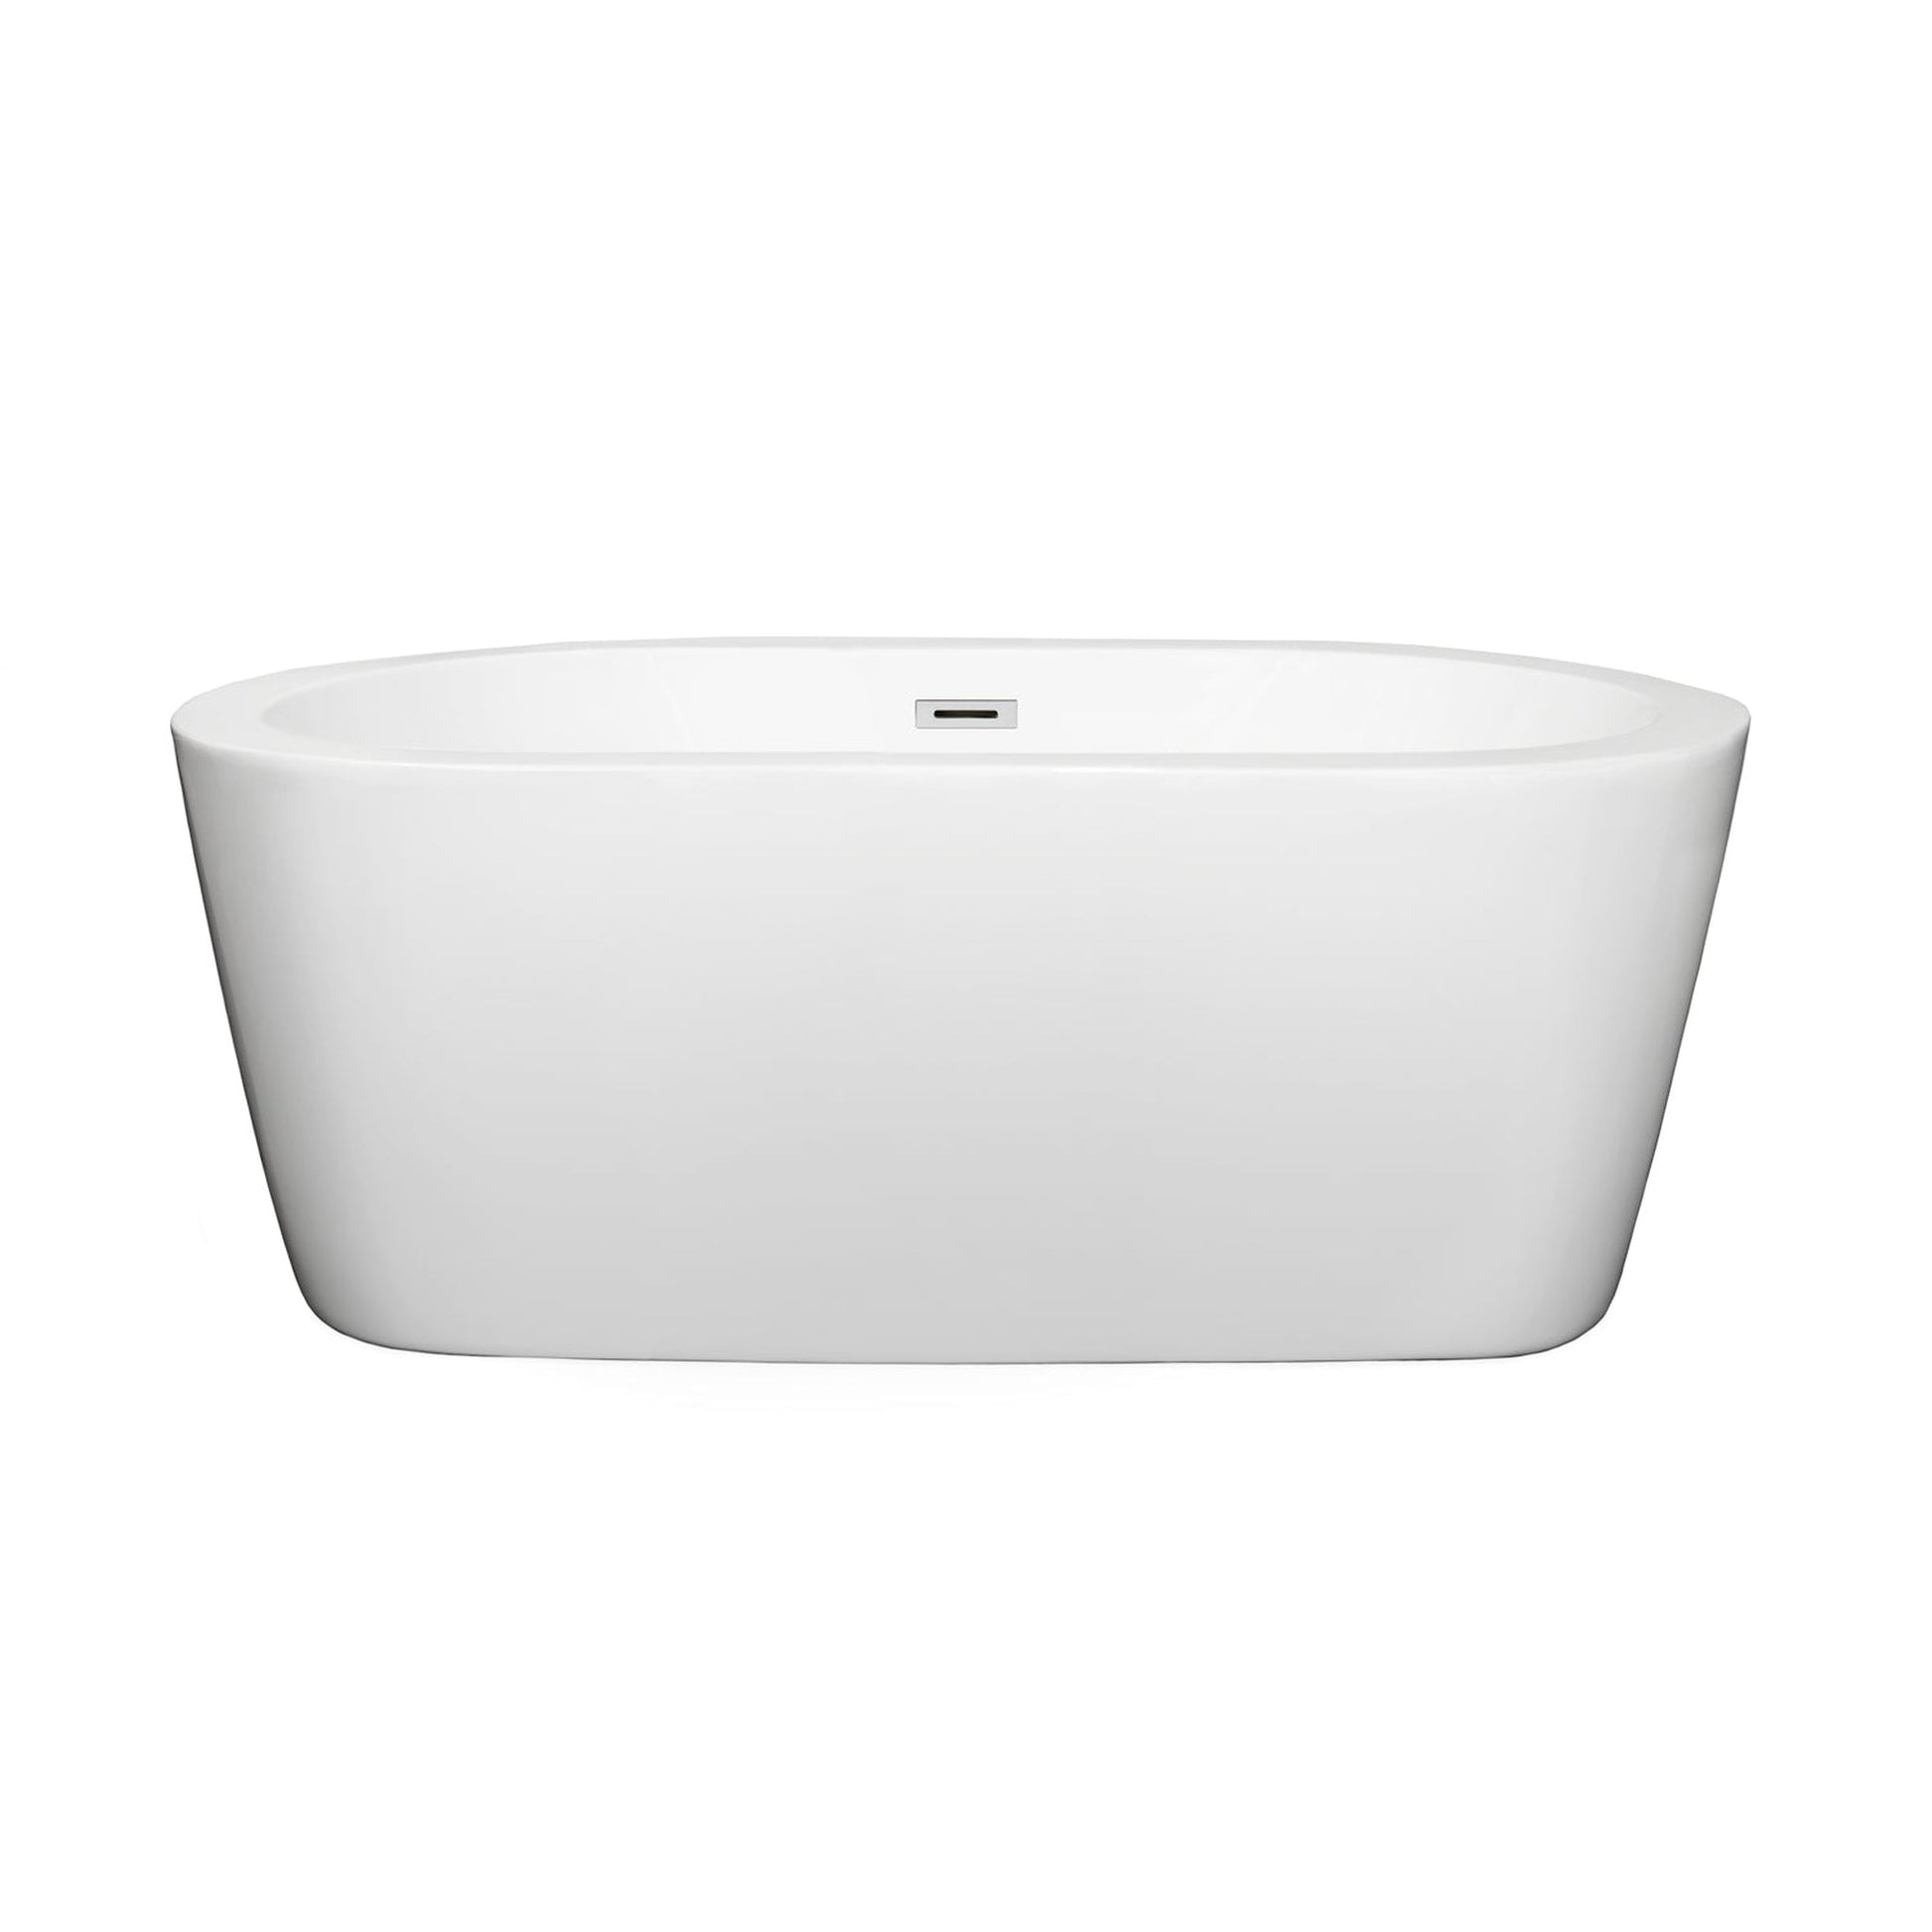 Wyndham Collection Mermaid 60" Freestanding Bathtub in White With Polished Chrome Drain and Overflow Trim